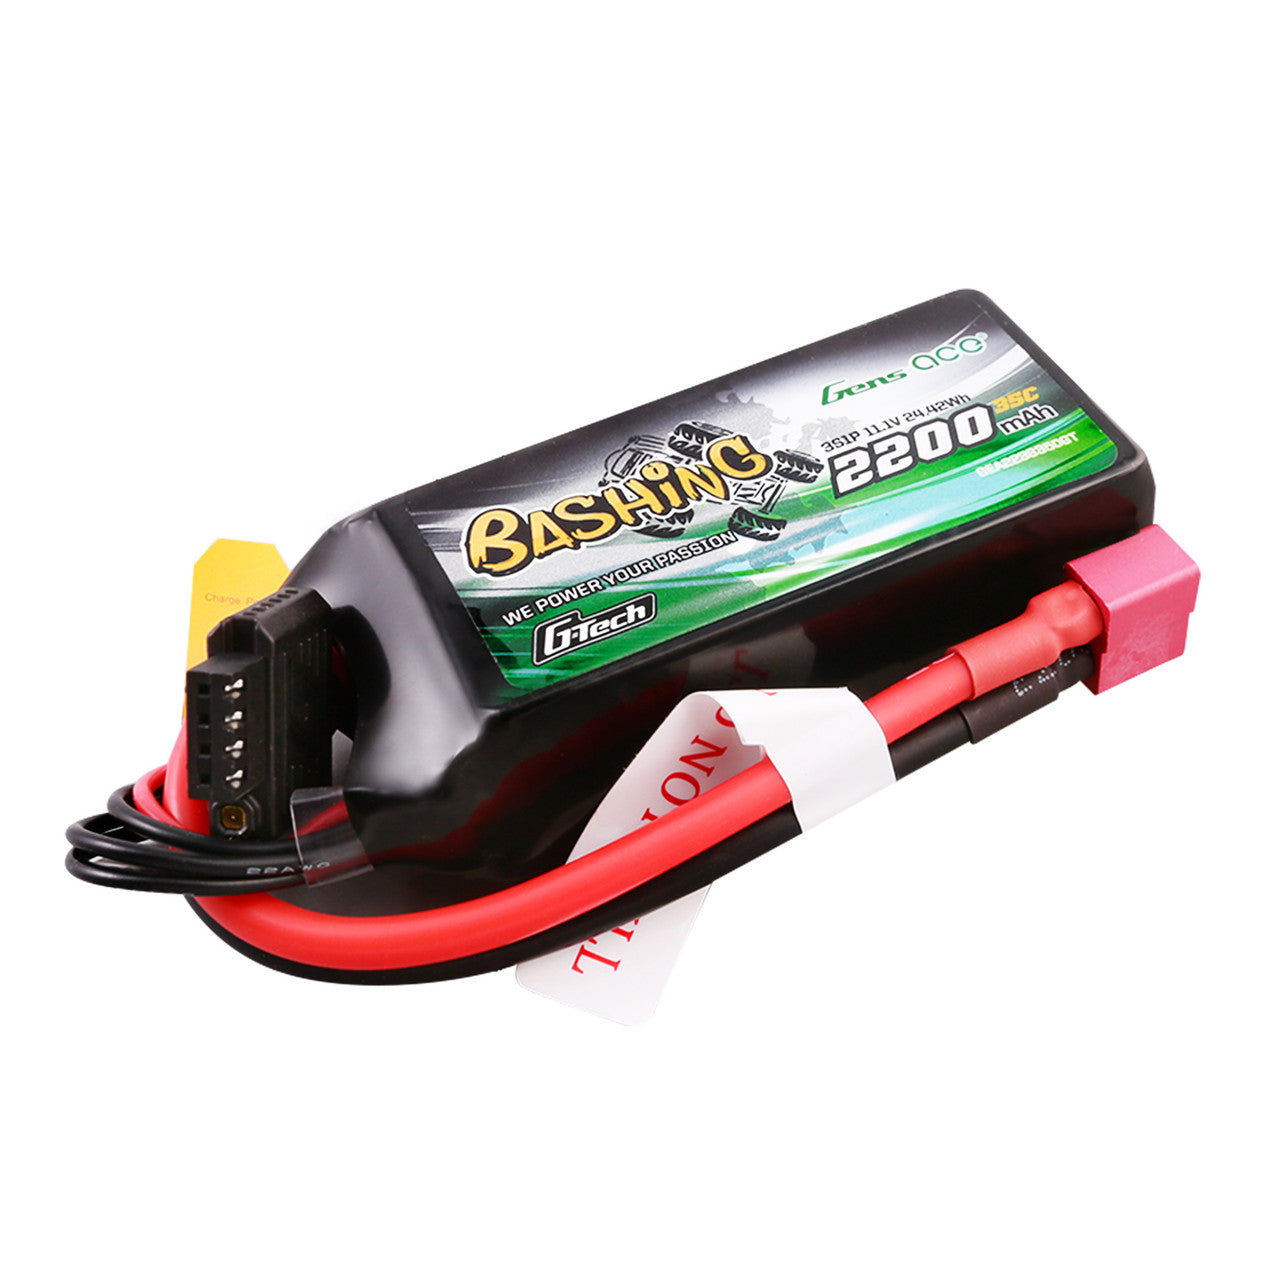 Gens Ace 2200mAh 3S 11.1V 35C Bashing G-Tech Lipo Battery Pack With Deans Plug